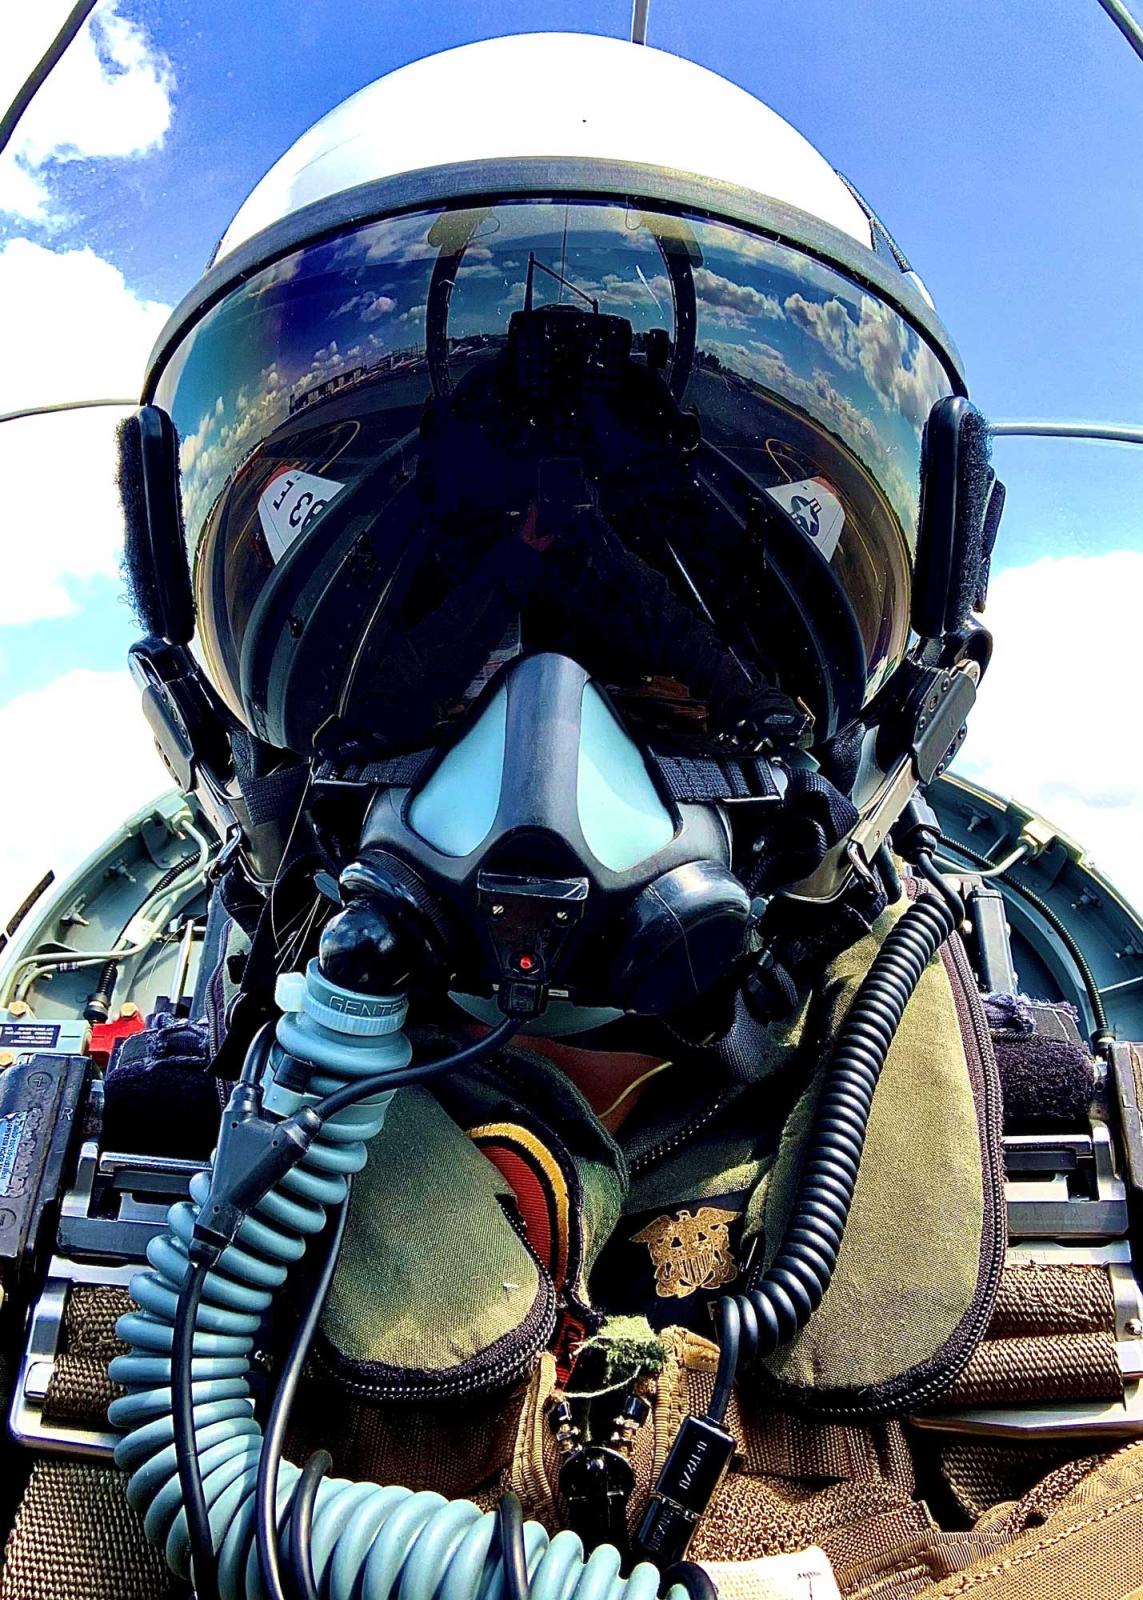 Taylor Rudolph wearing helmet in jet cockpit while flying